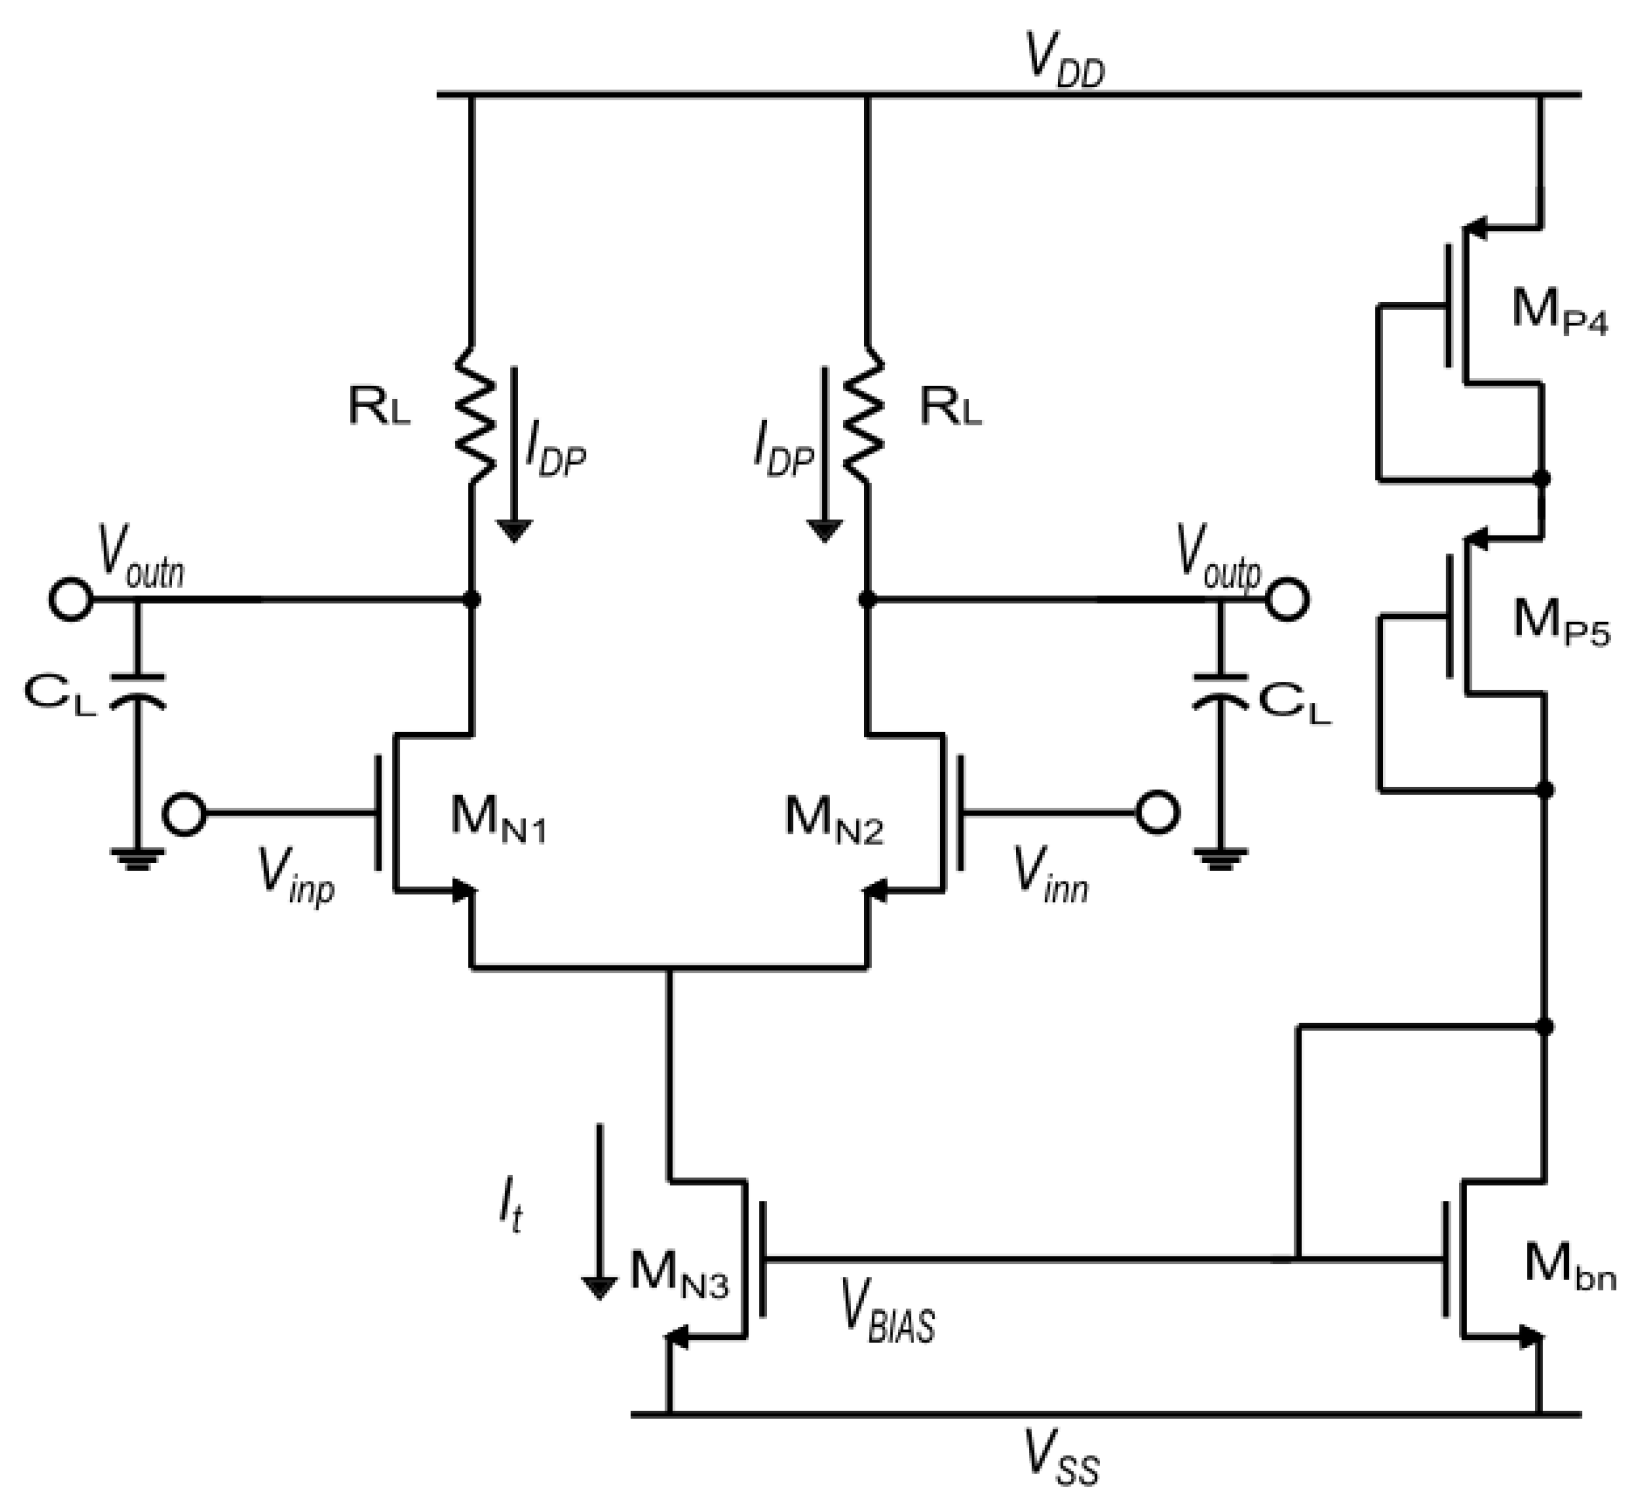 analog - For this particular Ring oscillator topology, will the circuit  prefer to latch up or oscillate? - Electrical Engineering Stack Exchange